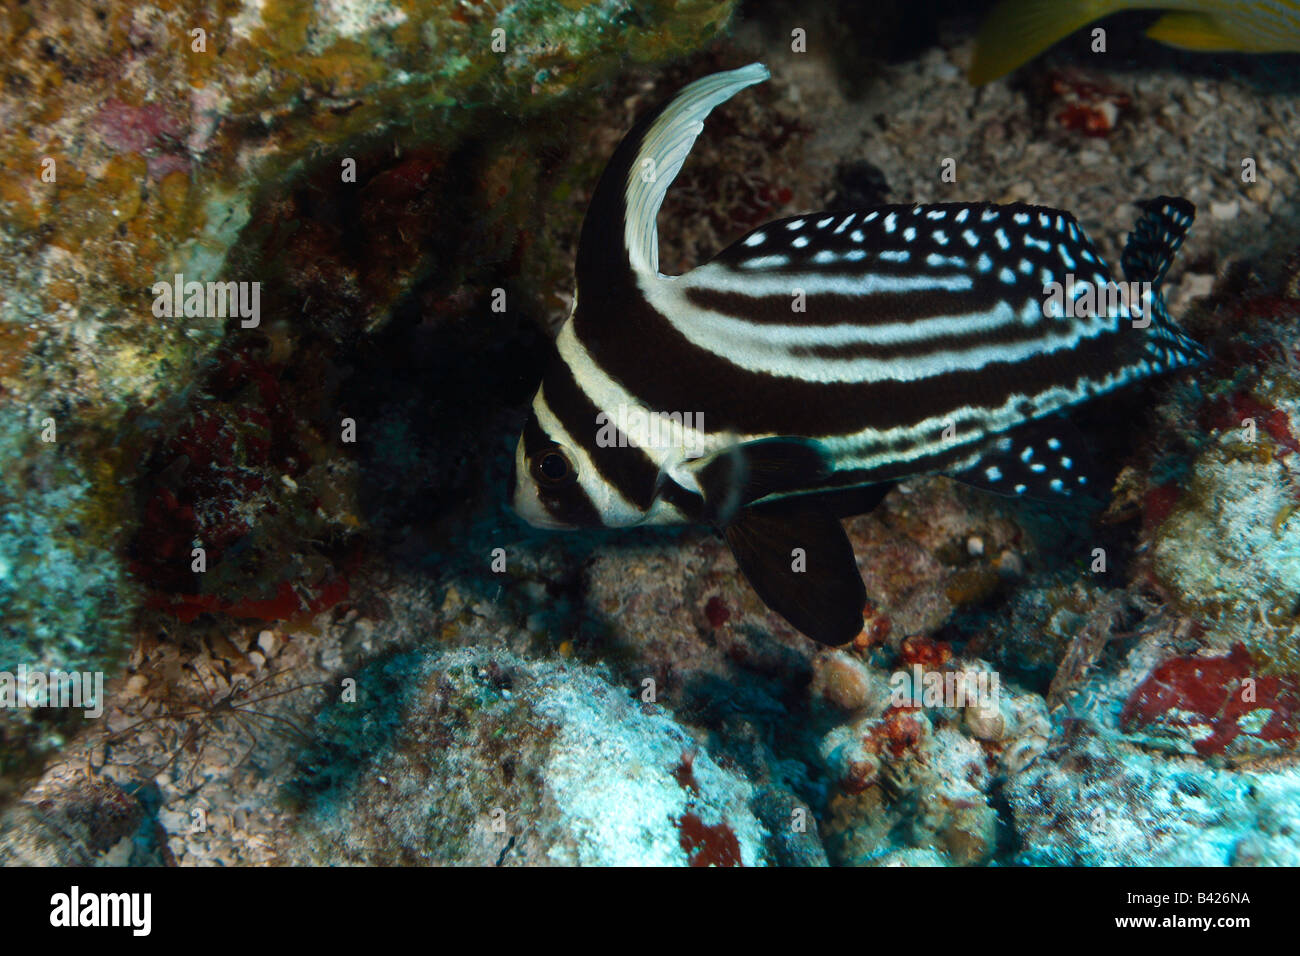 Spotted Drum fish swimming on the coral reef. Stock Photo